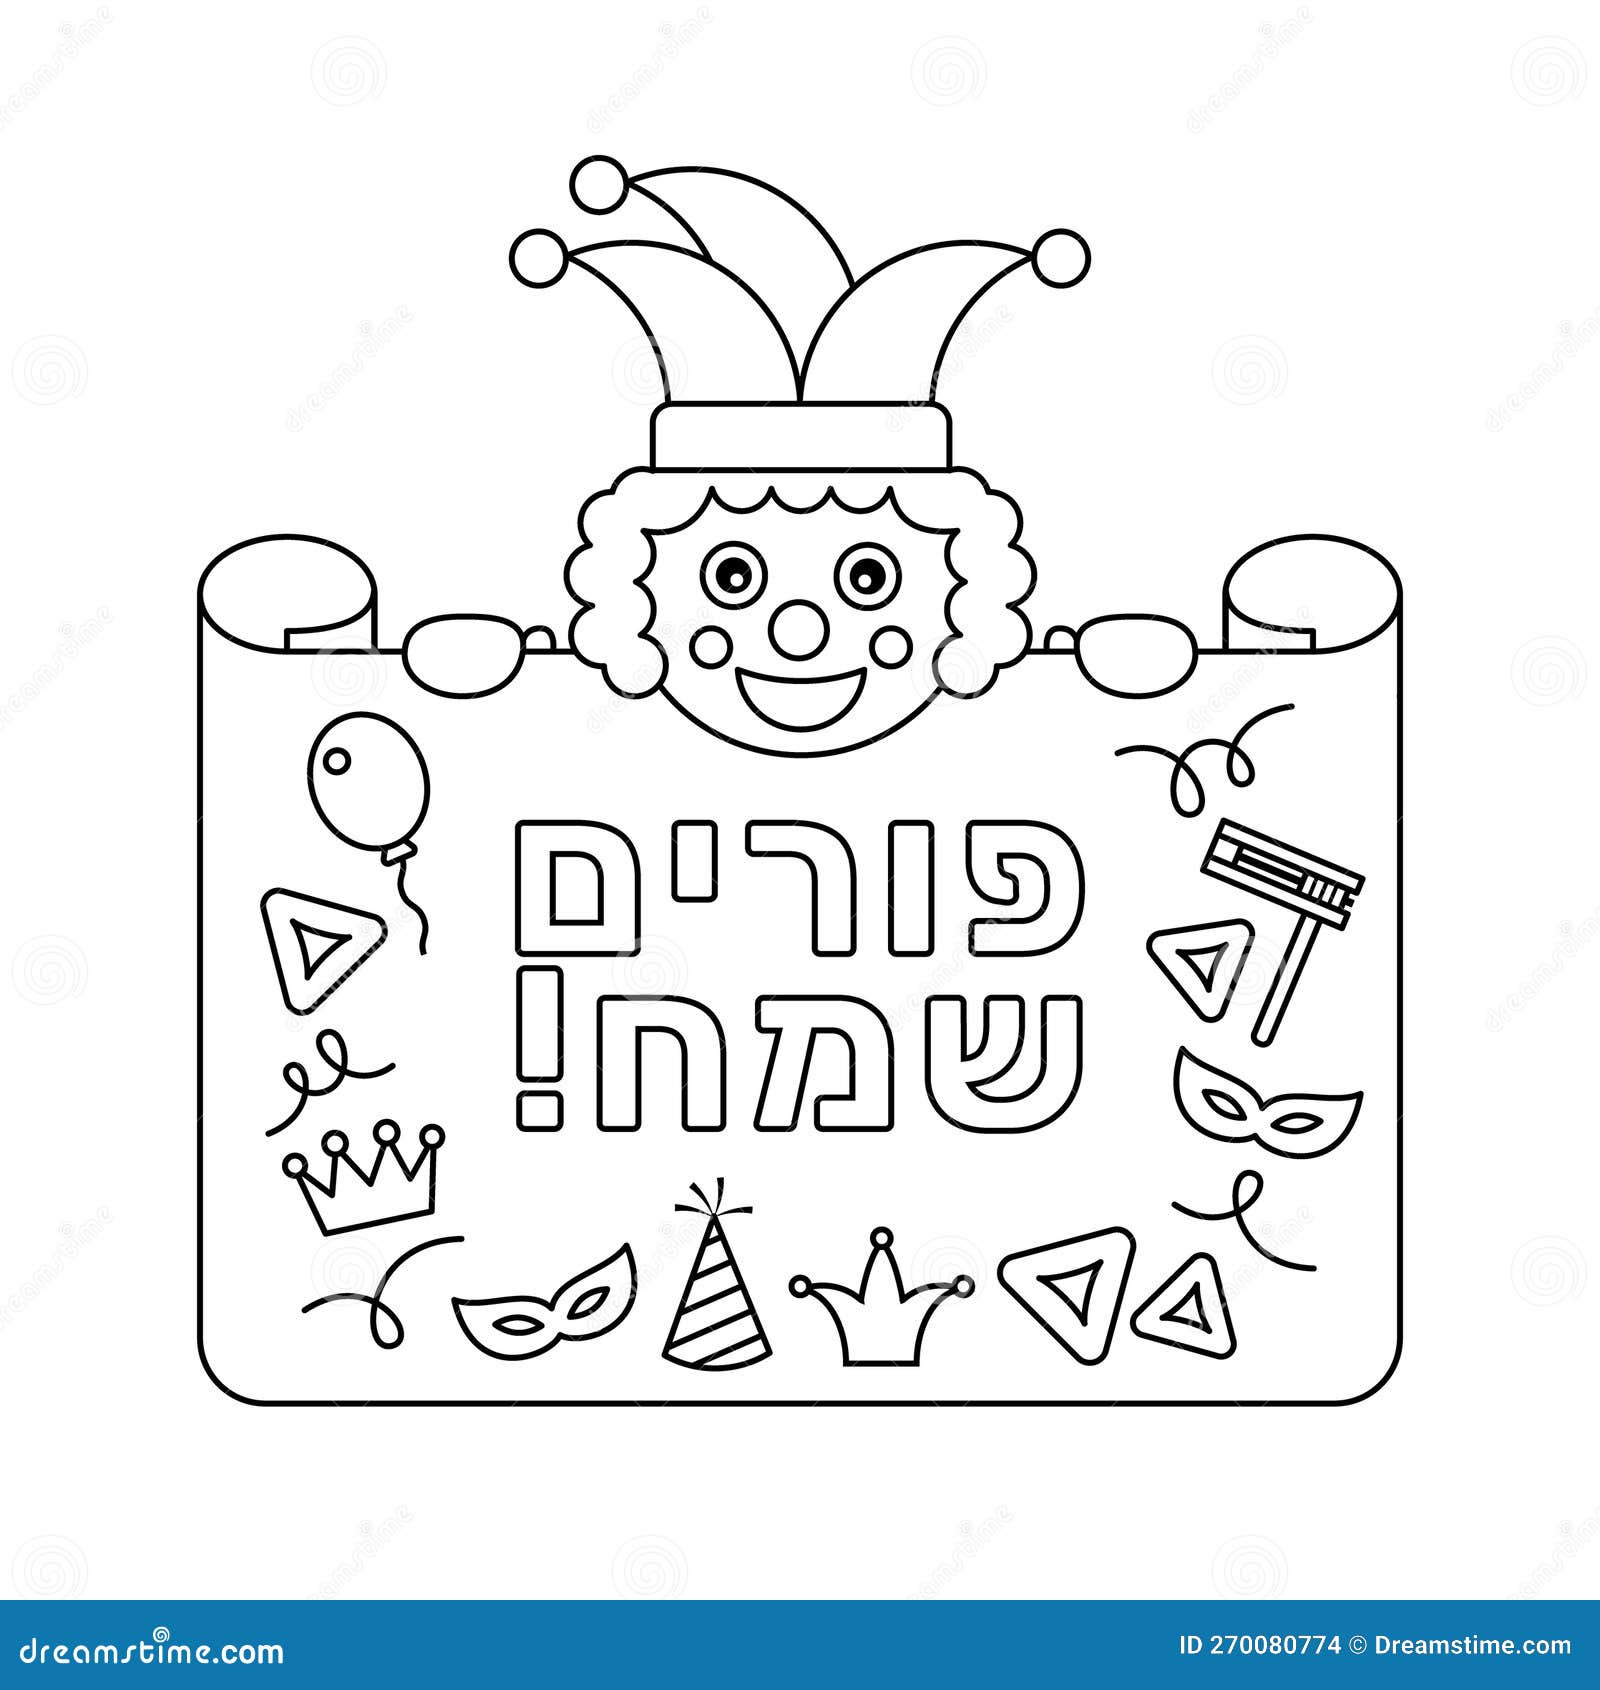 Purim greeting card and coloring page in linear style stock vector